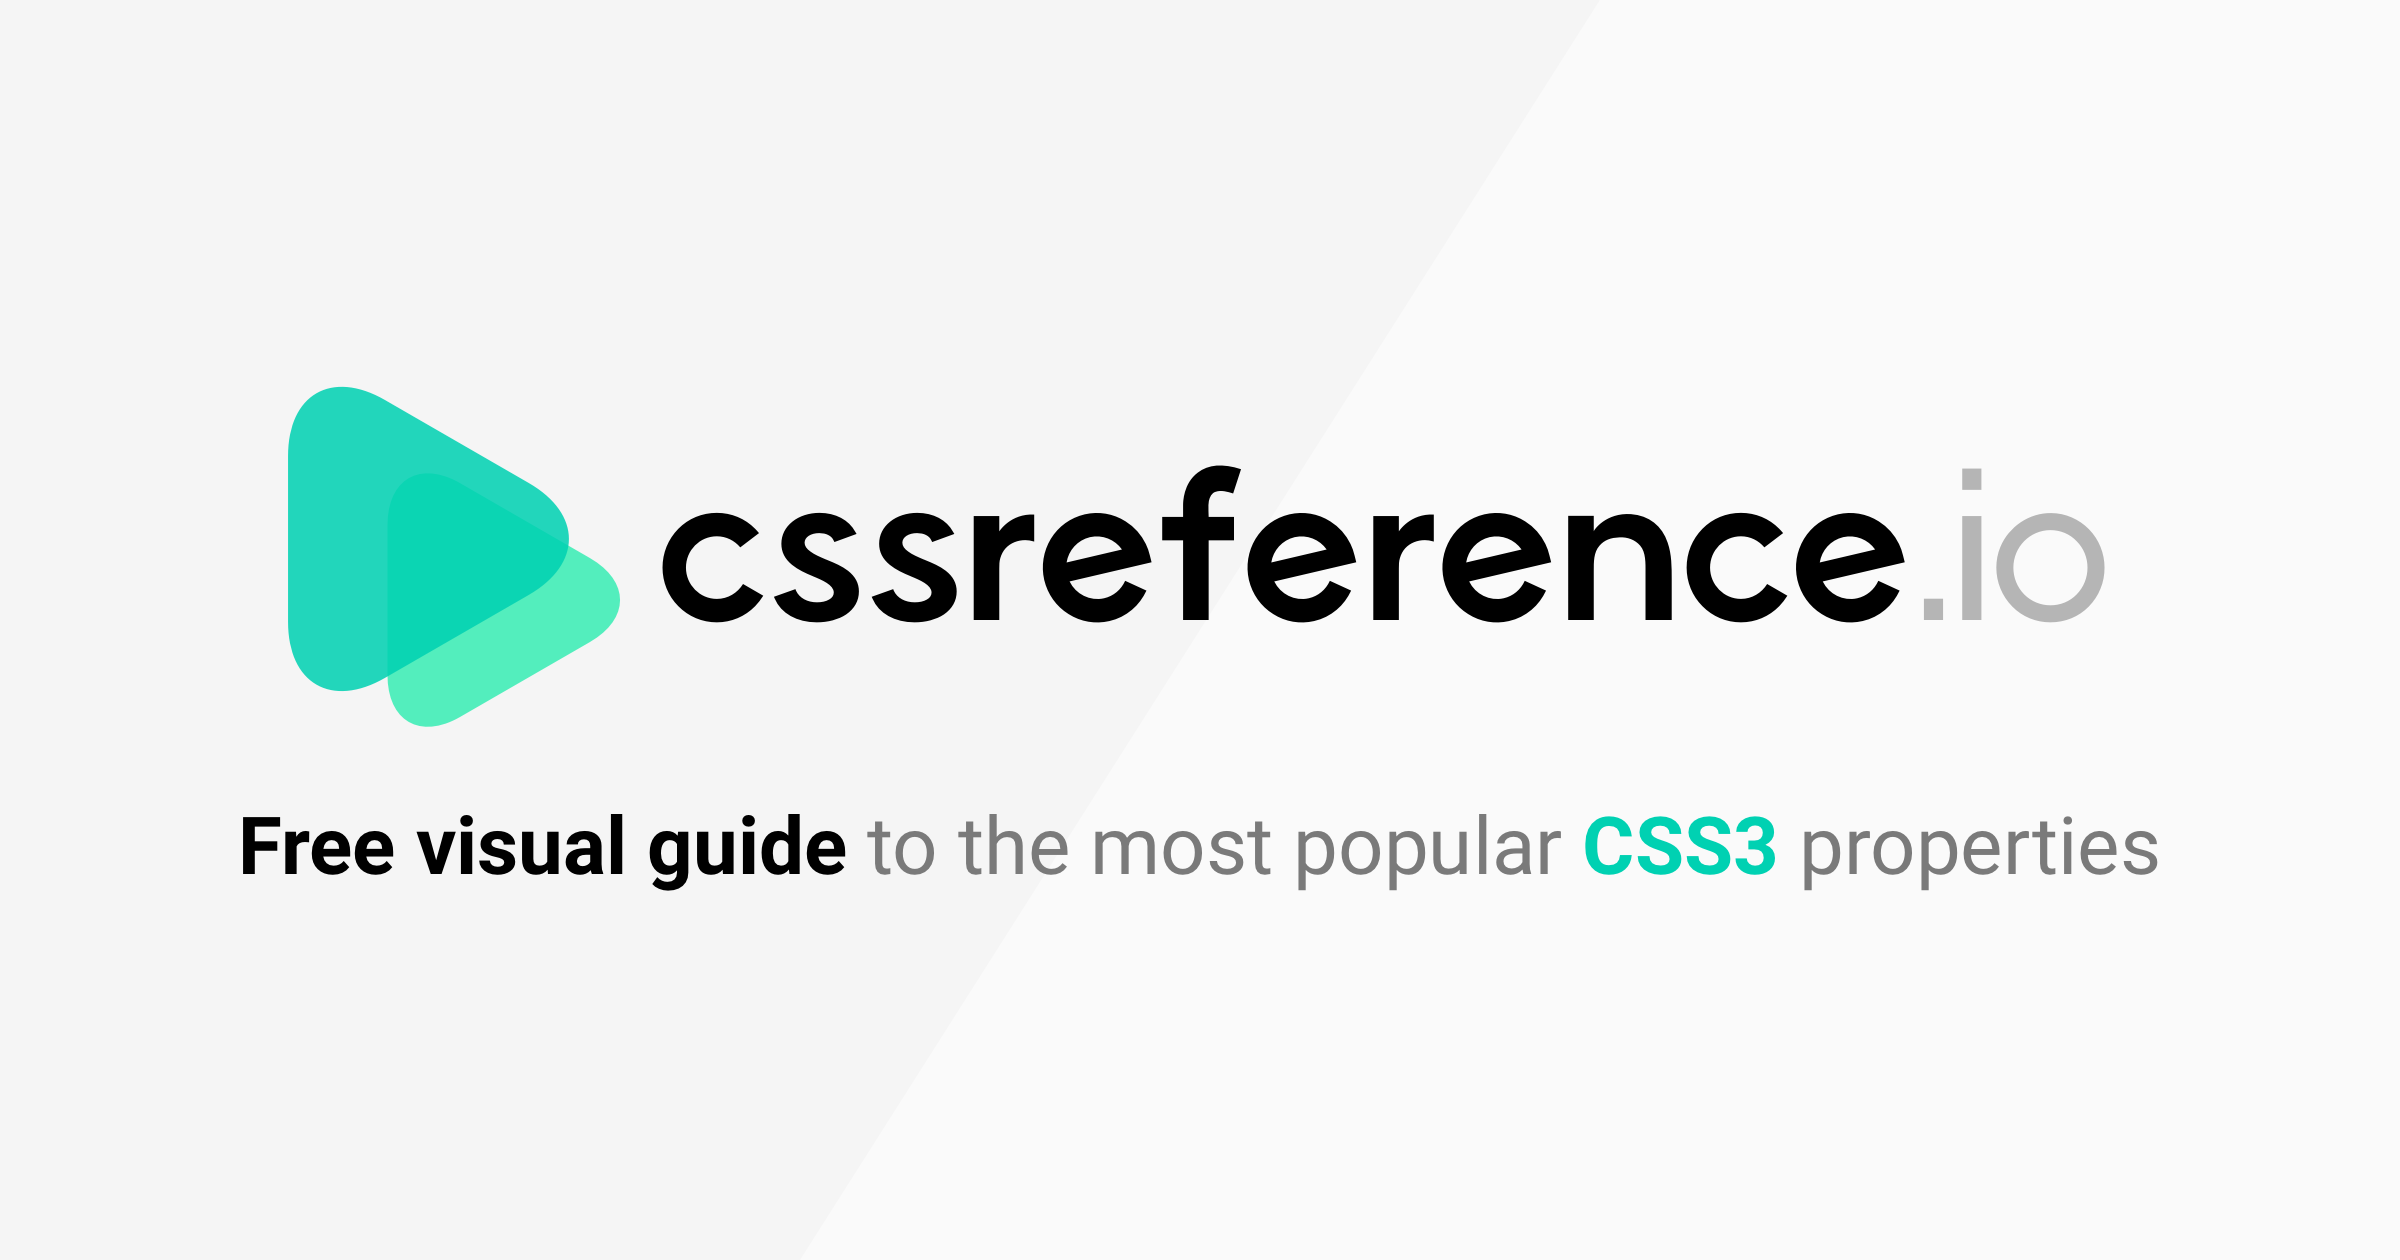 CSS Reference - A free visual guide to the most popular CSS properties.